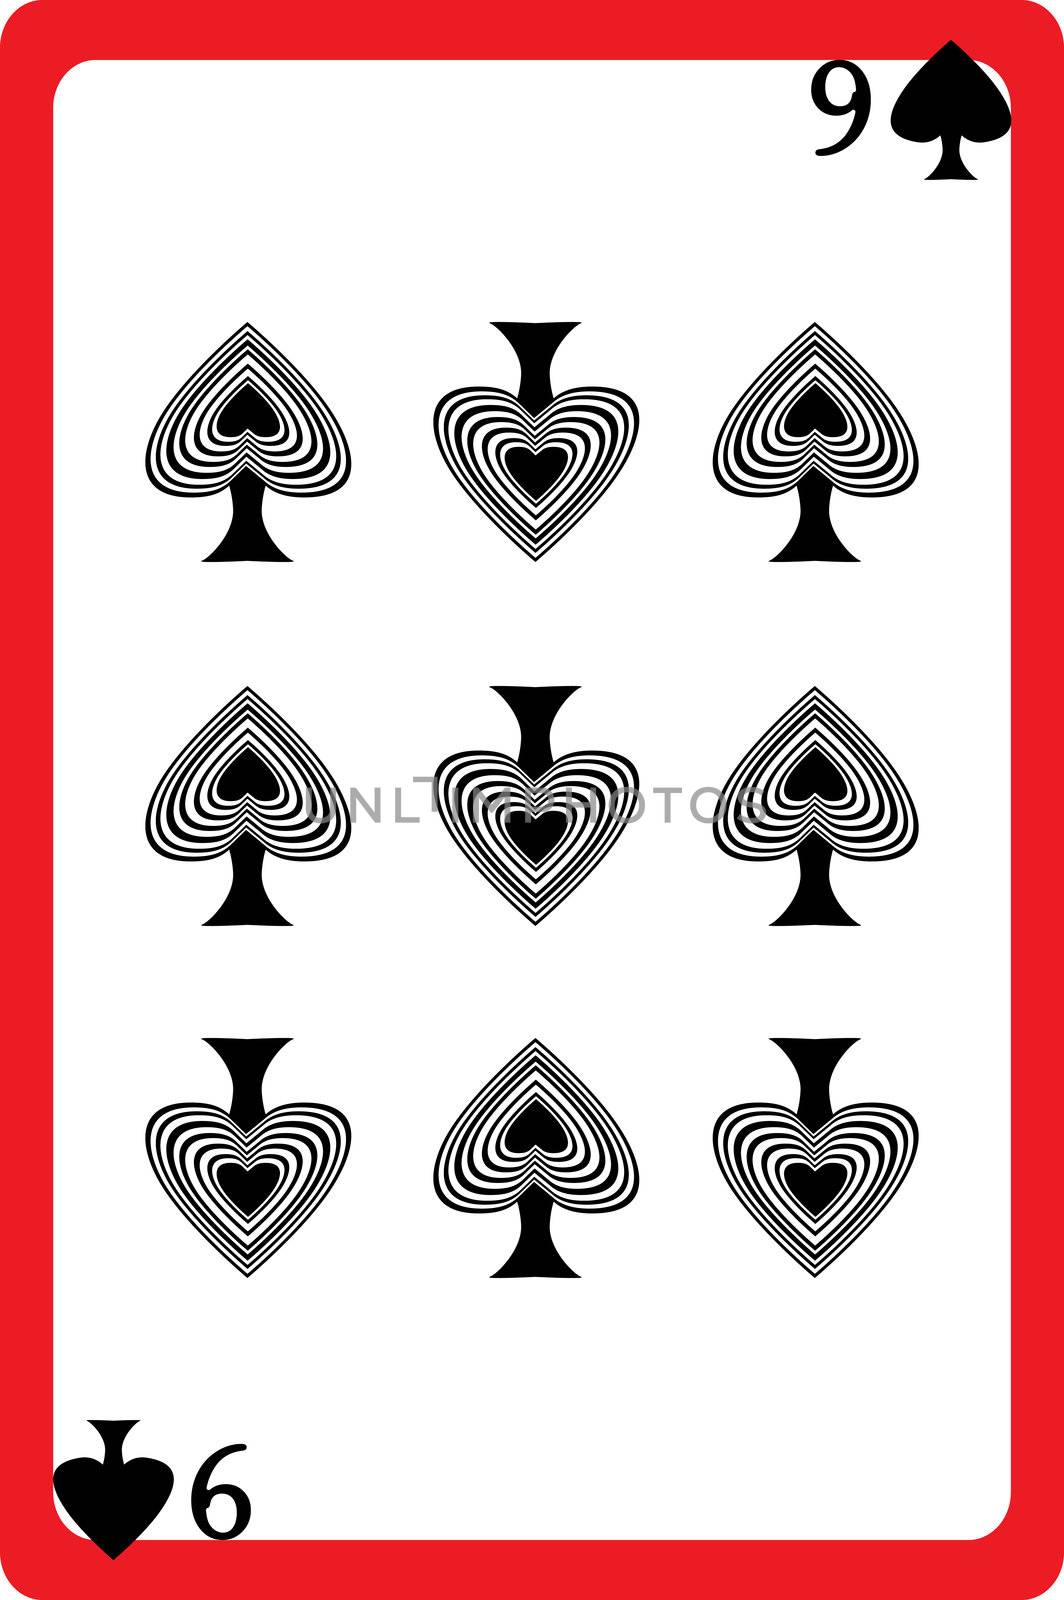 Scale hand drawn illustration of a playing card representing the nine of spades, one element of a deck